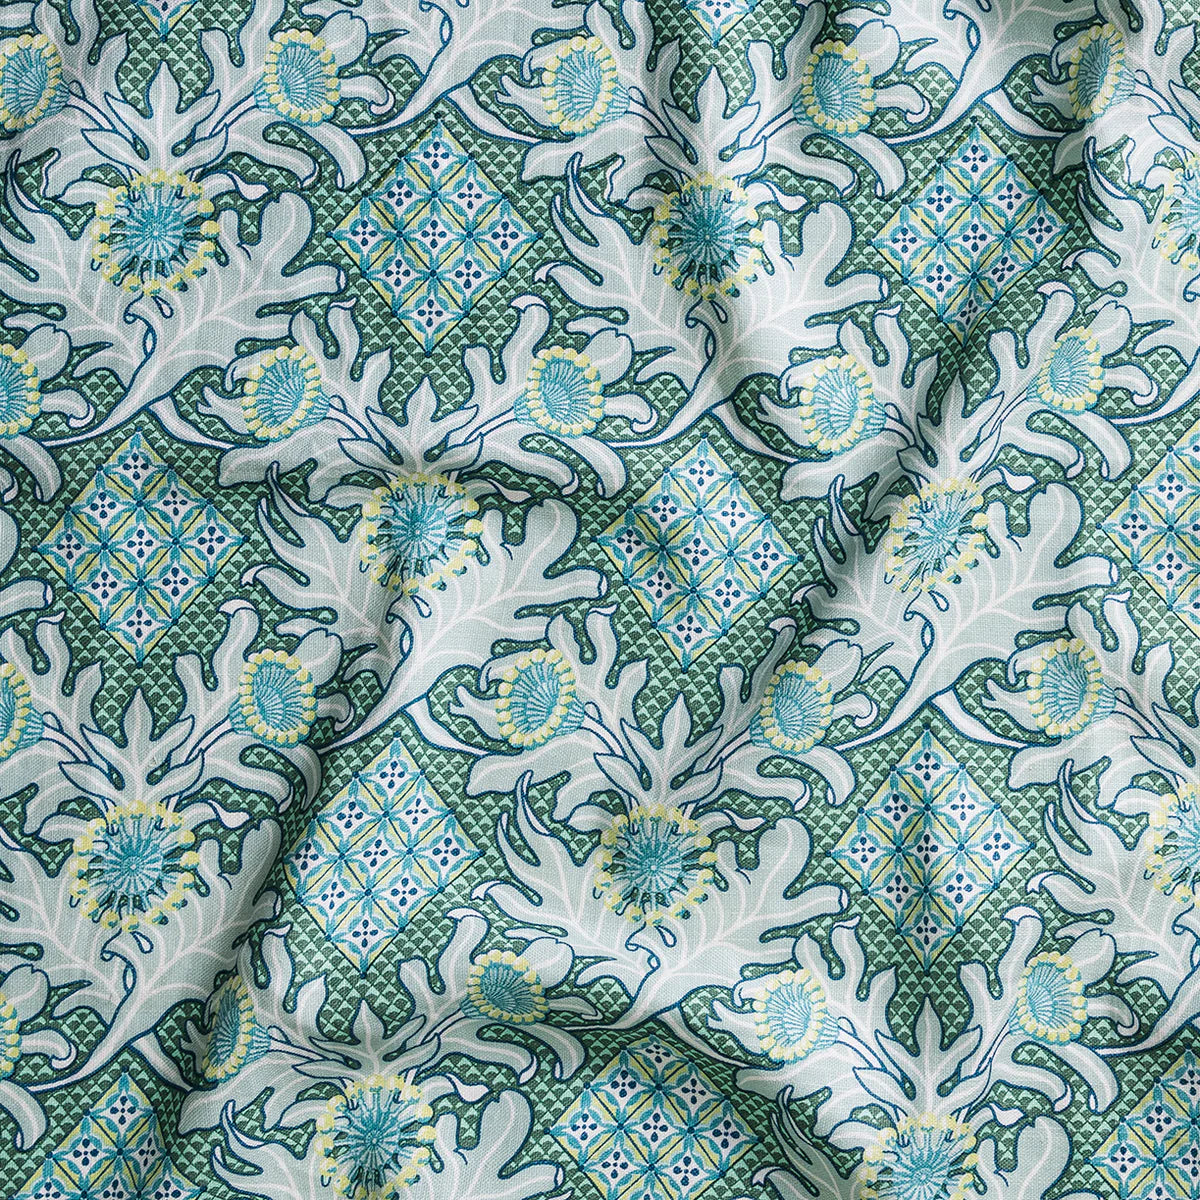 Draped fabric in a dense print mixing geometric and botanical motifs in turquoise, yellow and light aqua